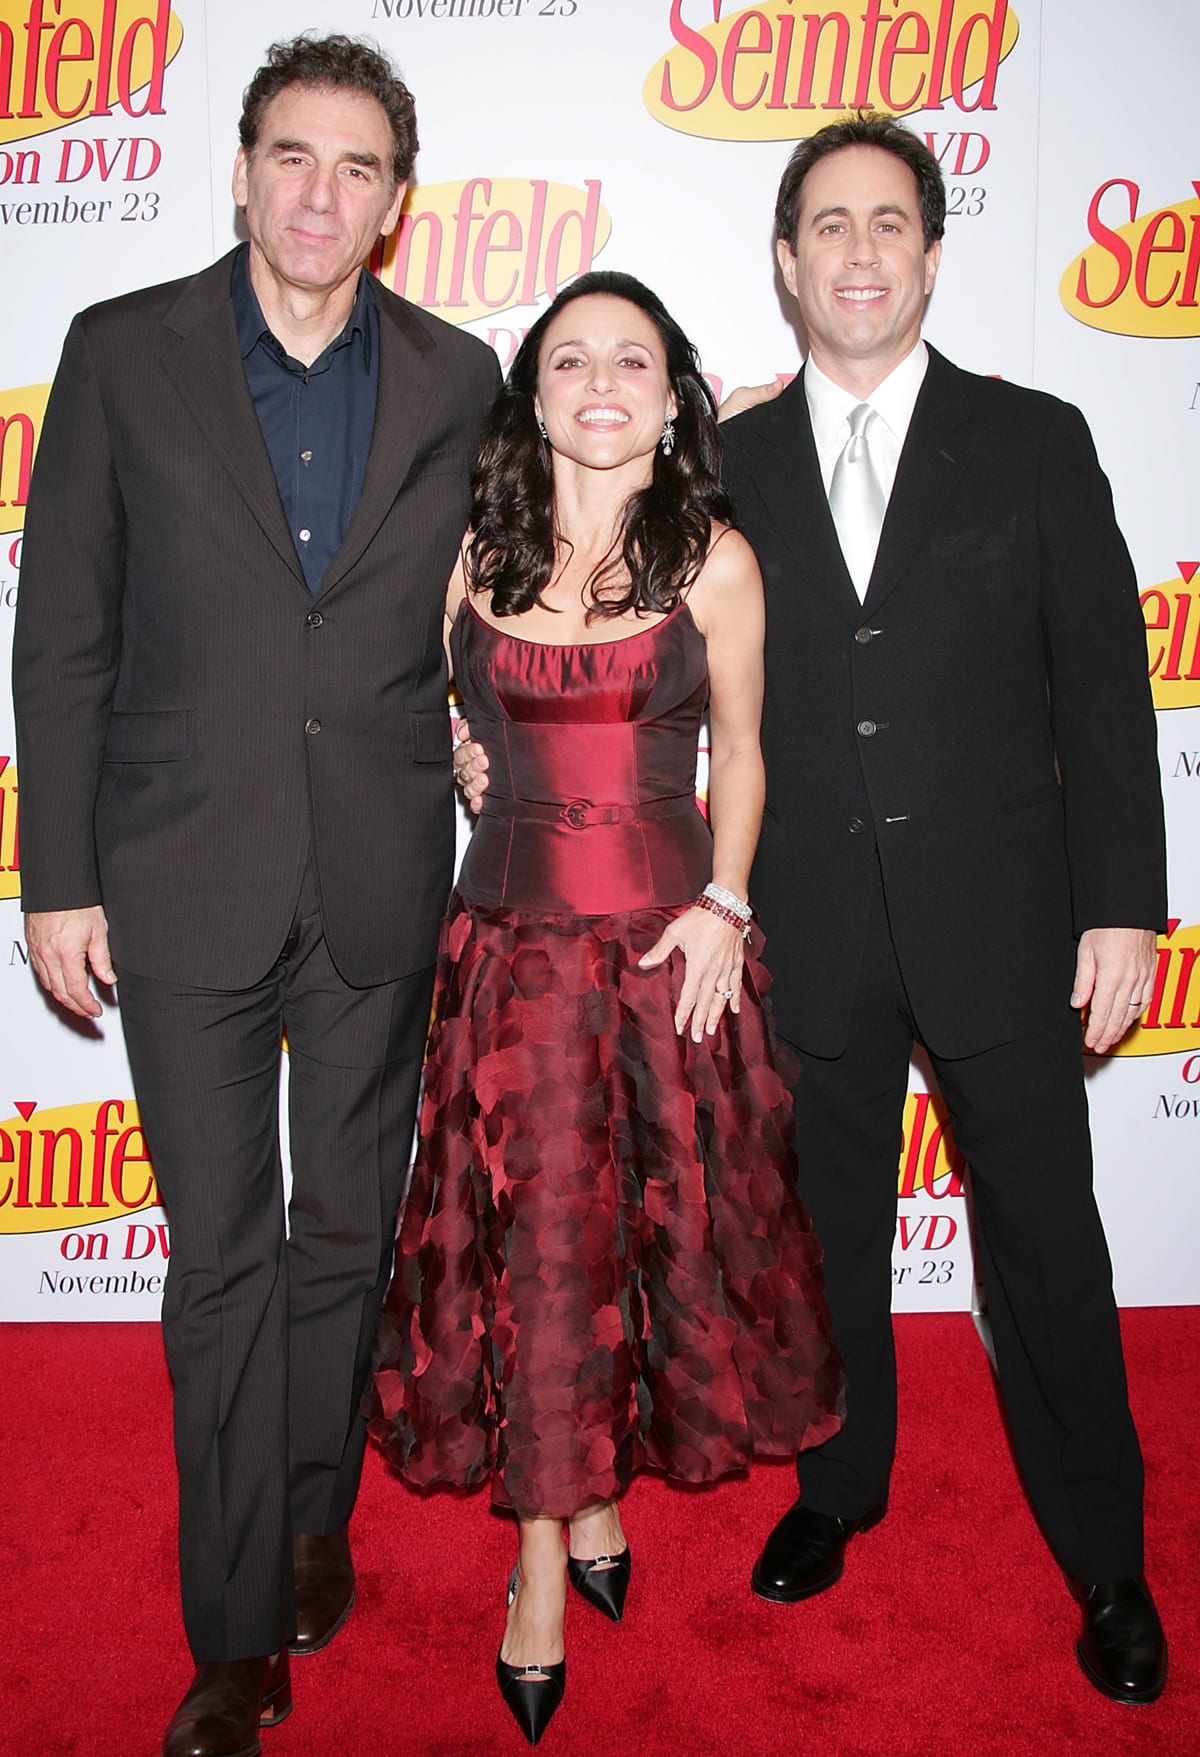 On November 18, 2004, in New York, Jerry Seinfeld (with a net worth of $950 million), Julia Louis-Dreyfus (net worth of $250 million), and Michael Richards (net worth of $30 million) celebrated the DVD release of Seinfeld